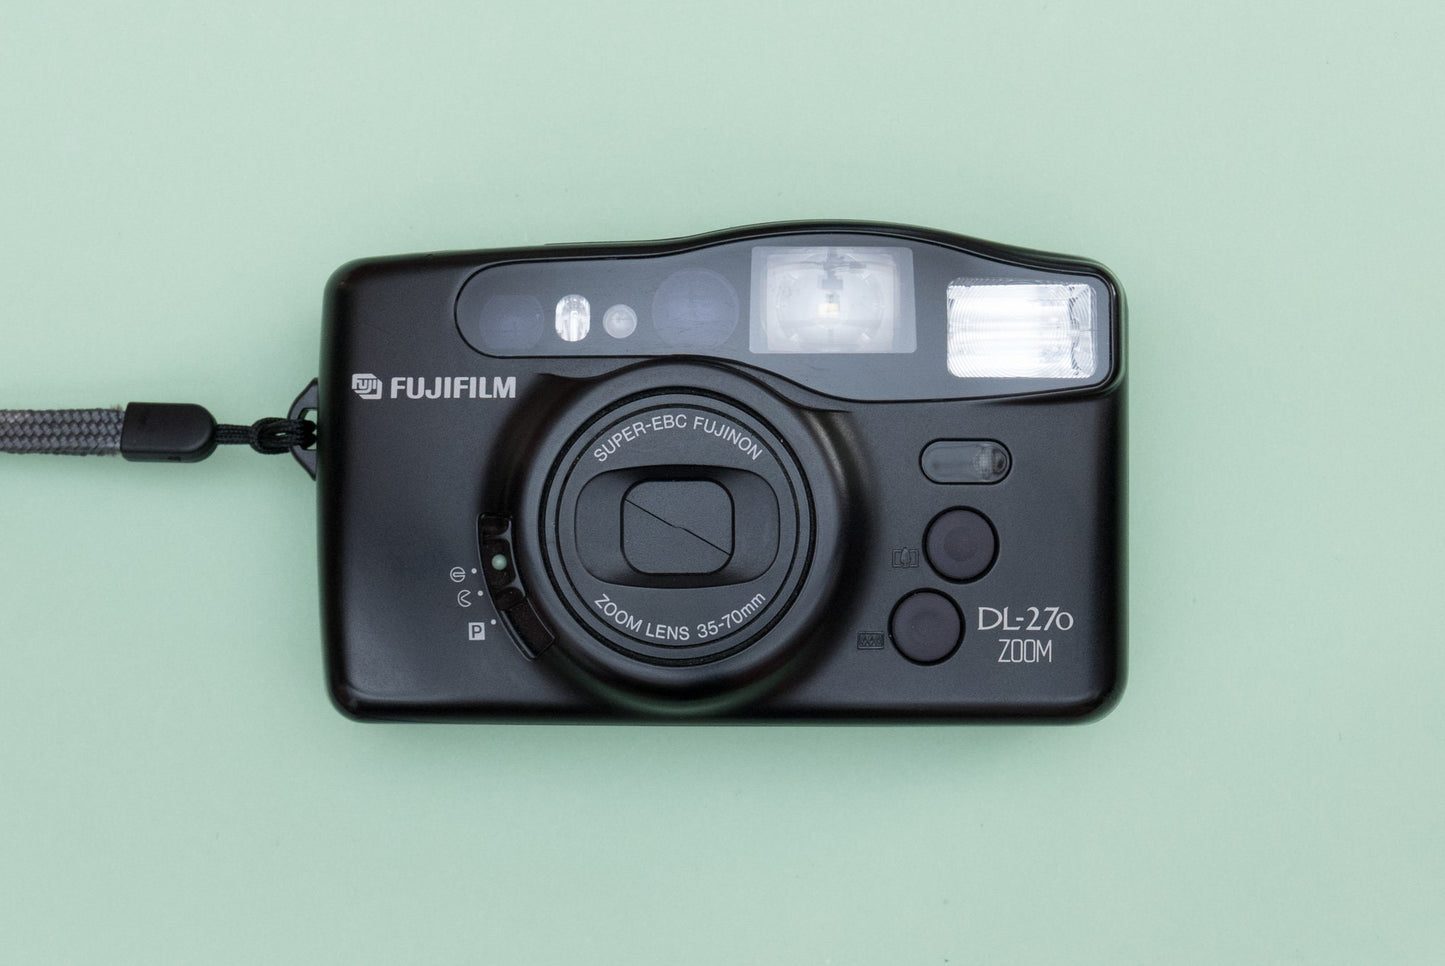 Fuji DL-270 Zoom Compact 35mm Point and Shoot Film Camera